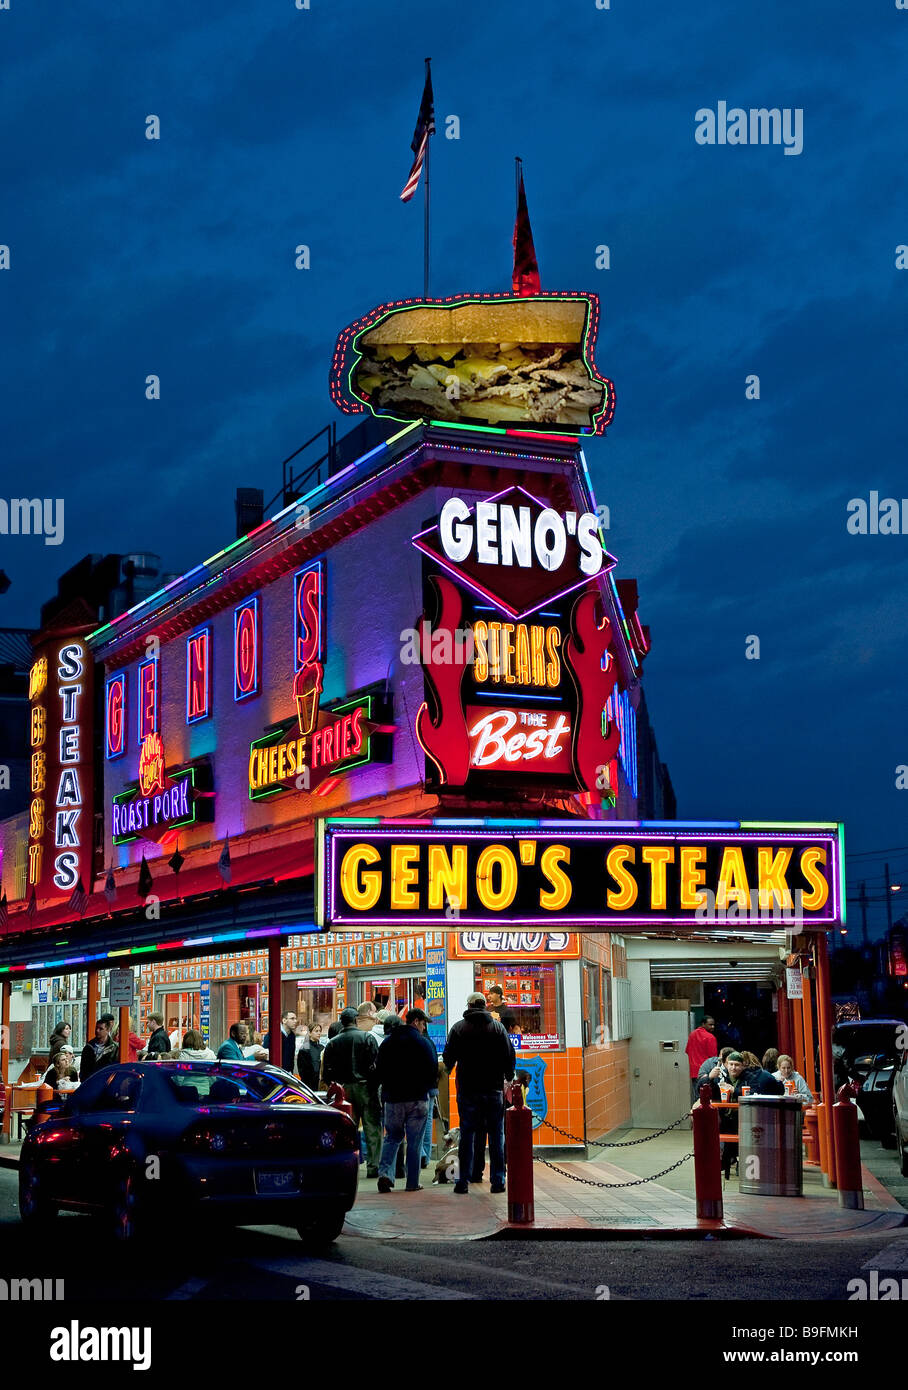 Steaks de Geno's South Philly Philadelphie PA USA Banque D'Images